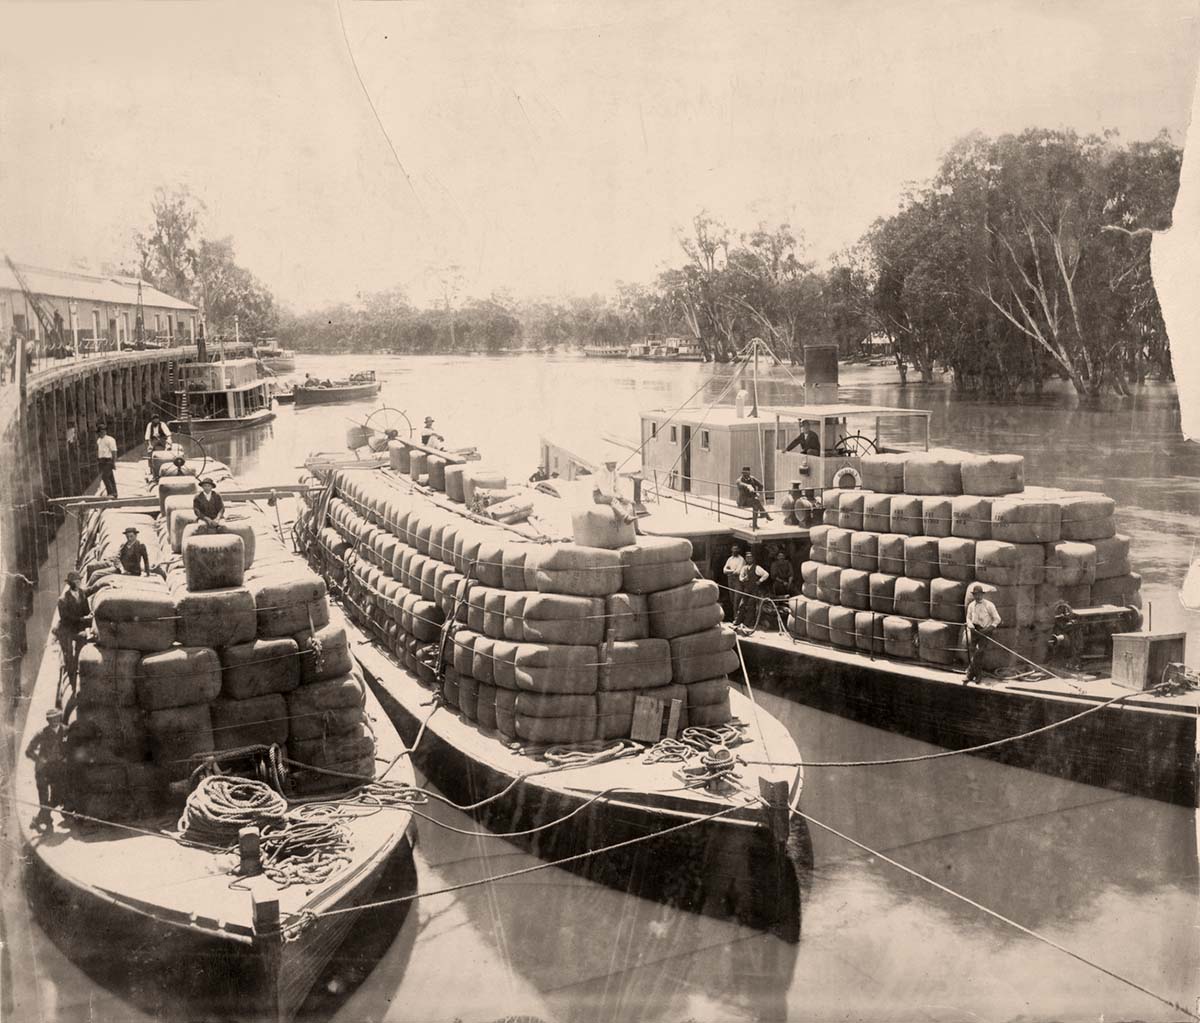 Echuca. Wool steamer 'Rodney' and barges, Echuca Wharf on the River Murray, 1893